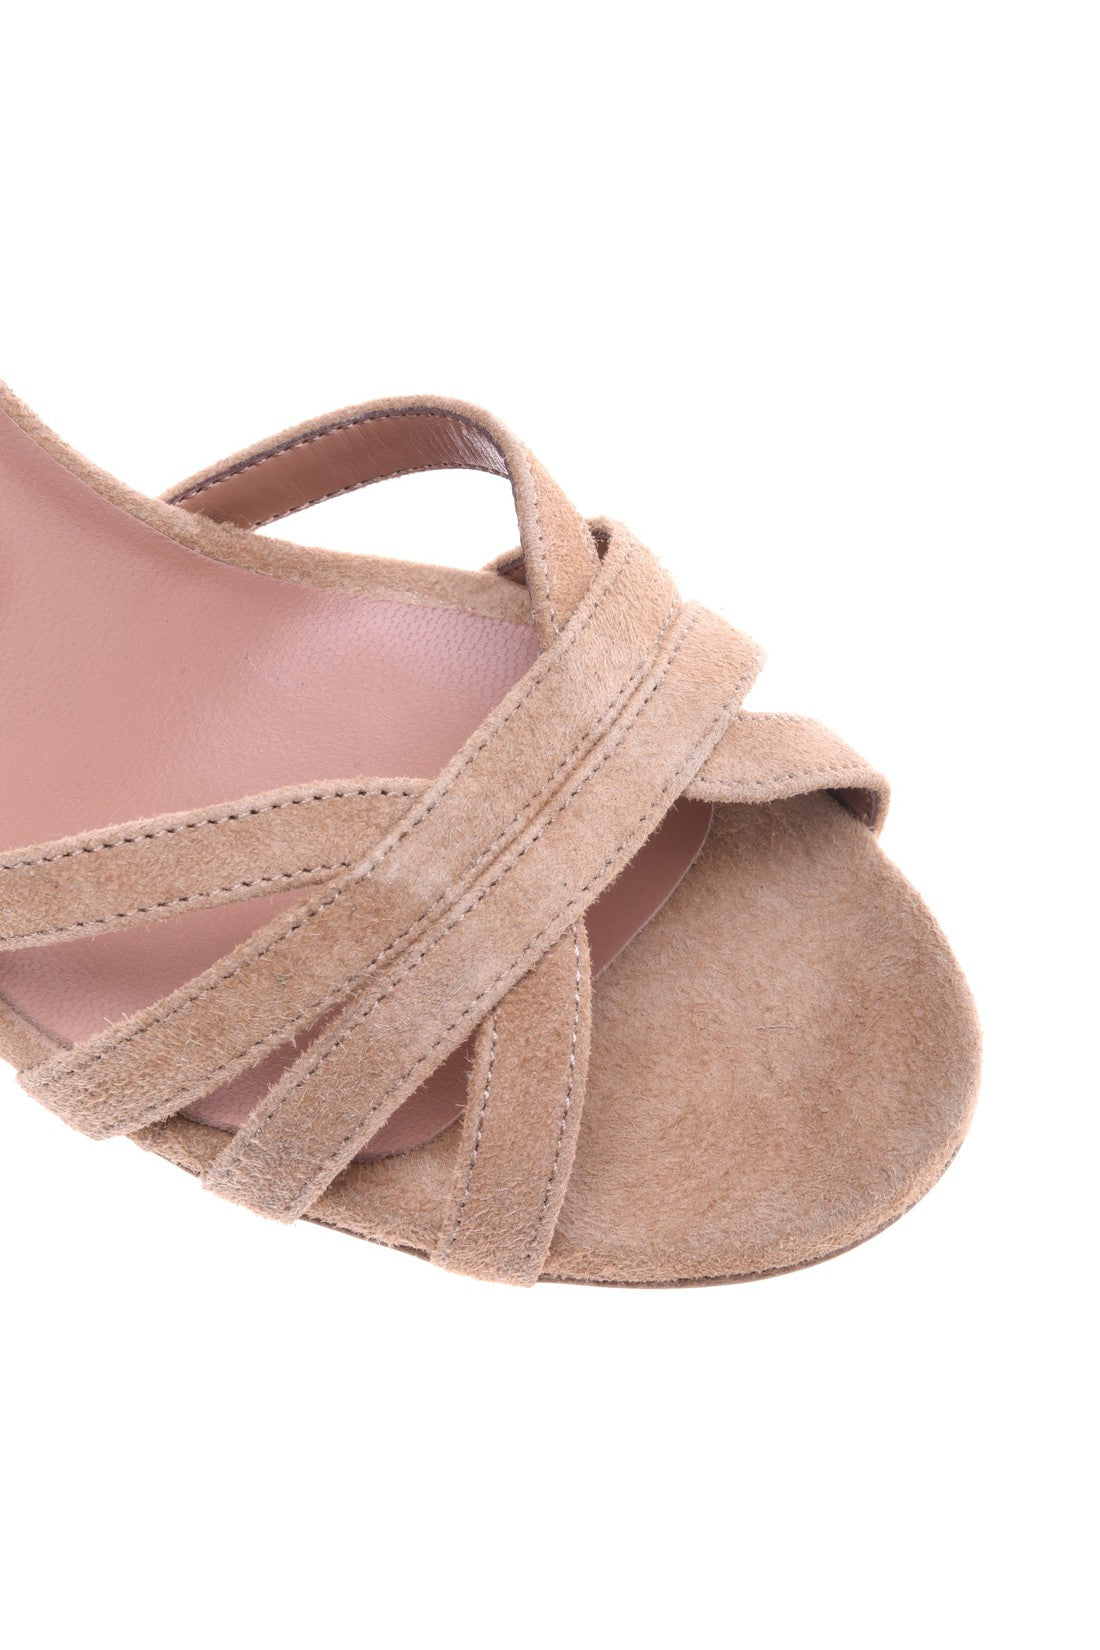 BALDININI-OUTLET-SALE-Sandal-in-taupe-suede-Sandalen-ARCHIVE-COLLECTION-4_8ae86a33-f9a4-4bdd-b230-ce8288406a7f.jpg